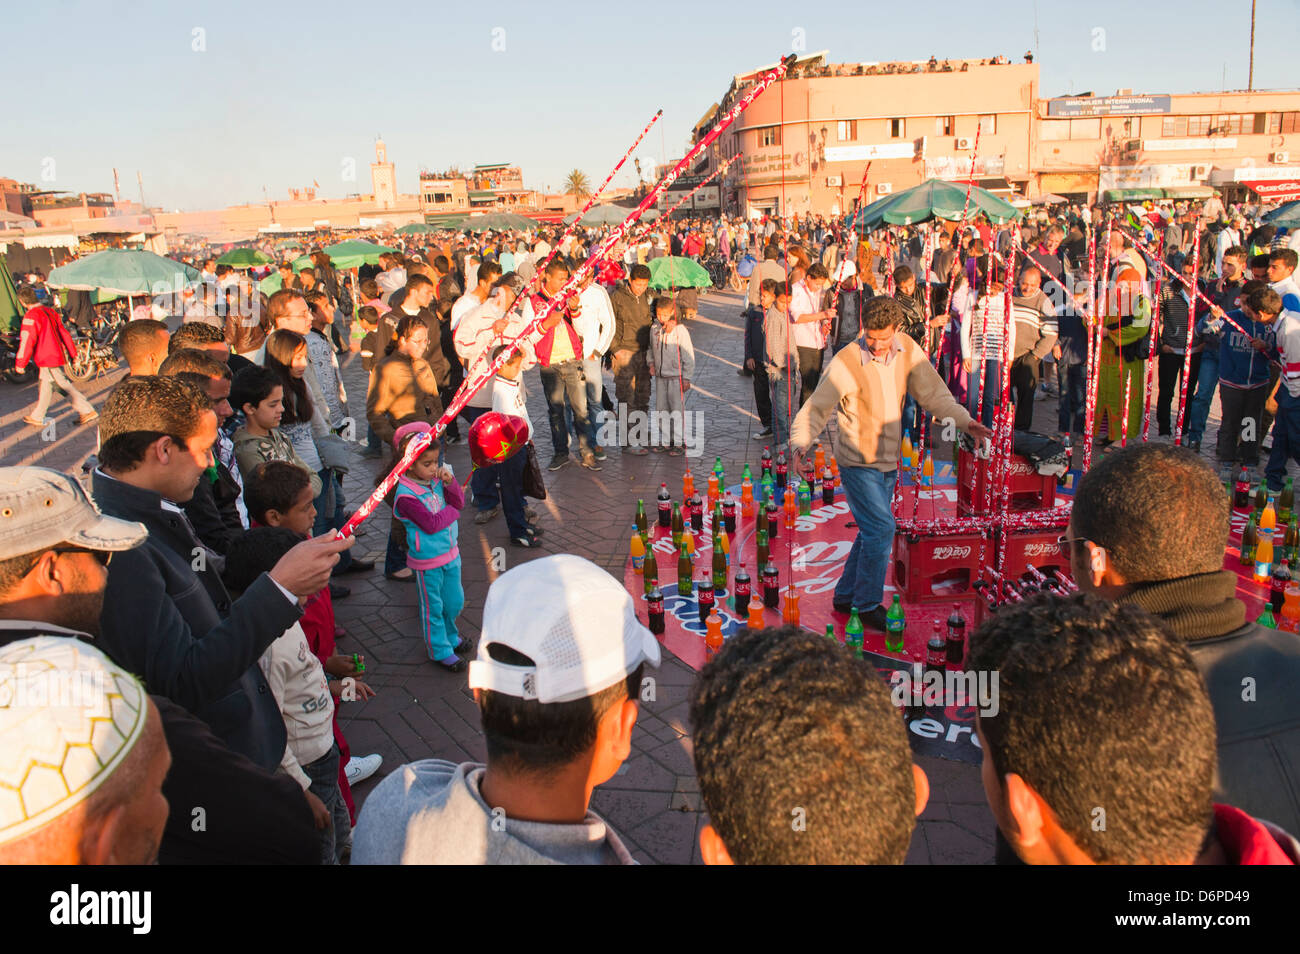 Moroccans playing games in Place Djemaa El Fna, Marrakech, Morocco, North Africa, Africa Stock Photo